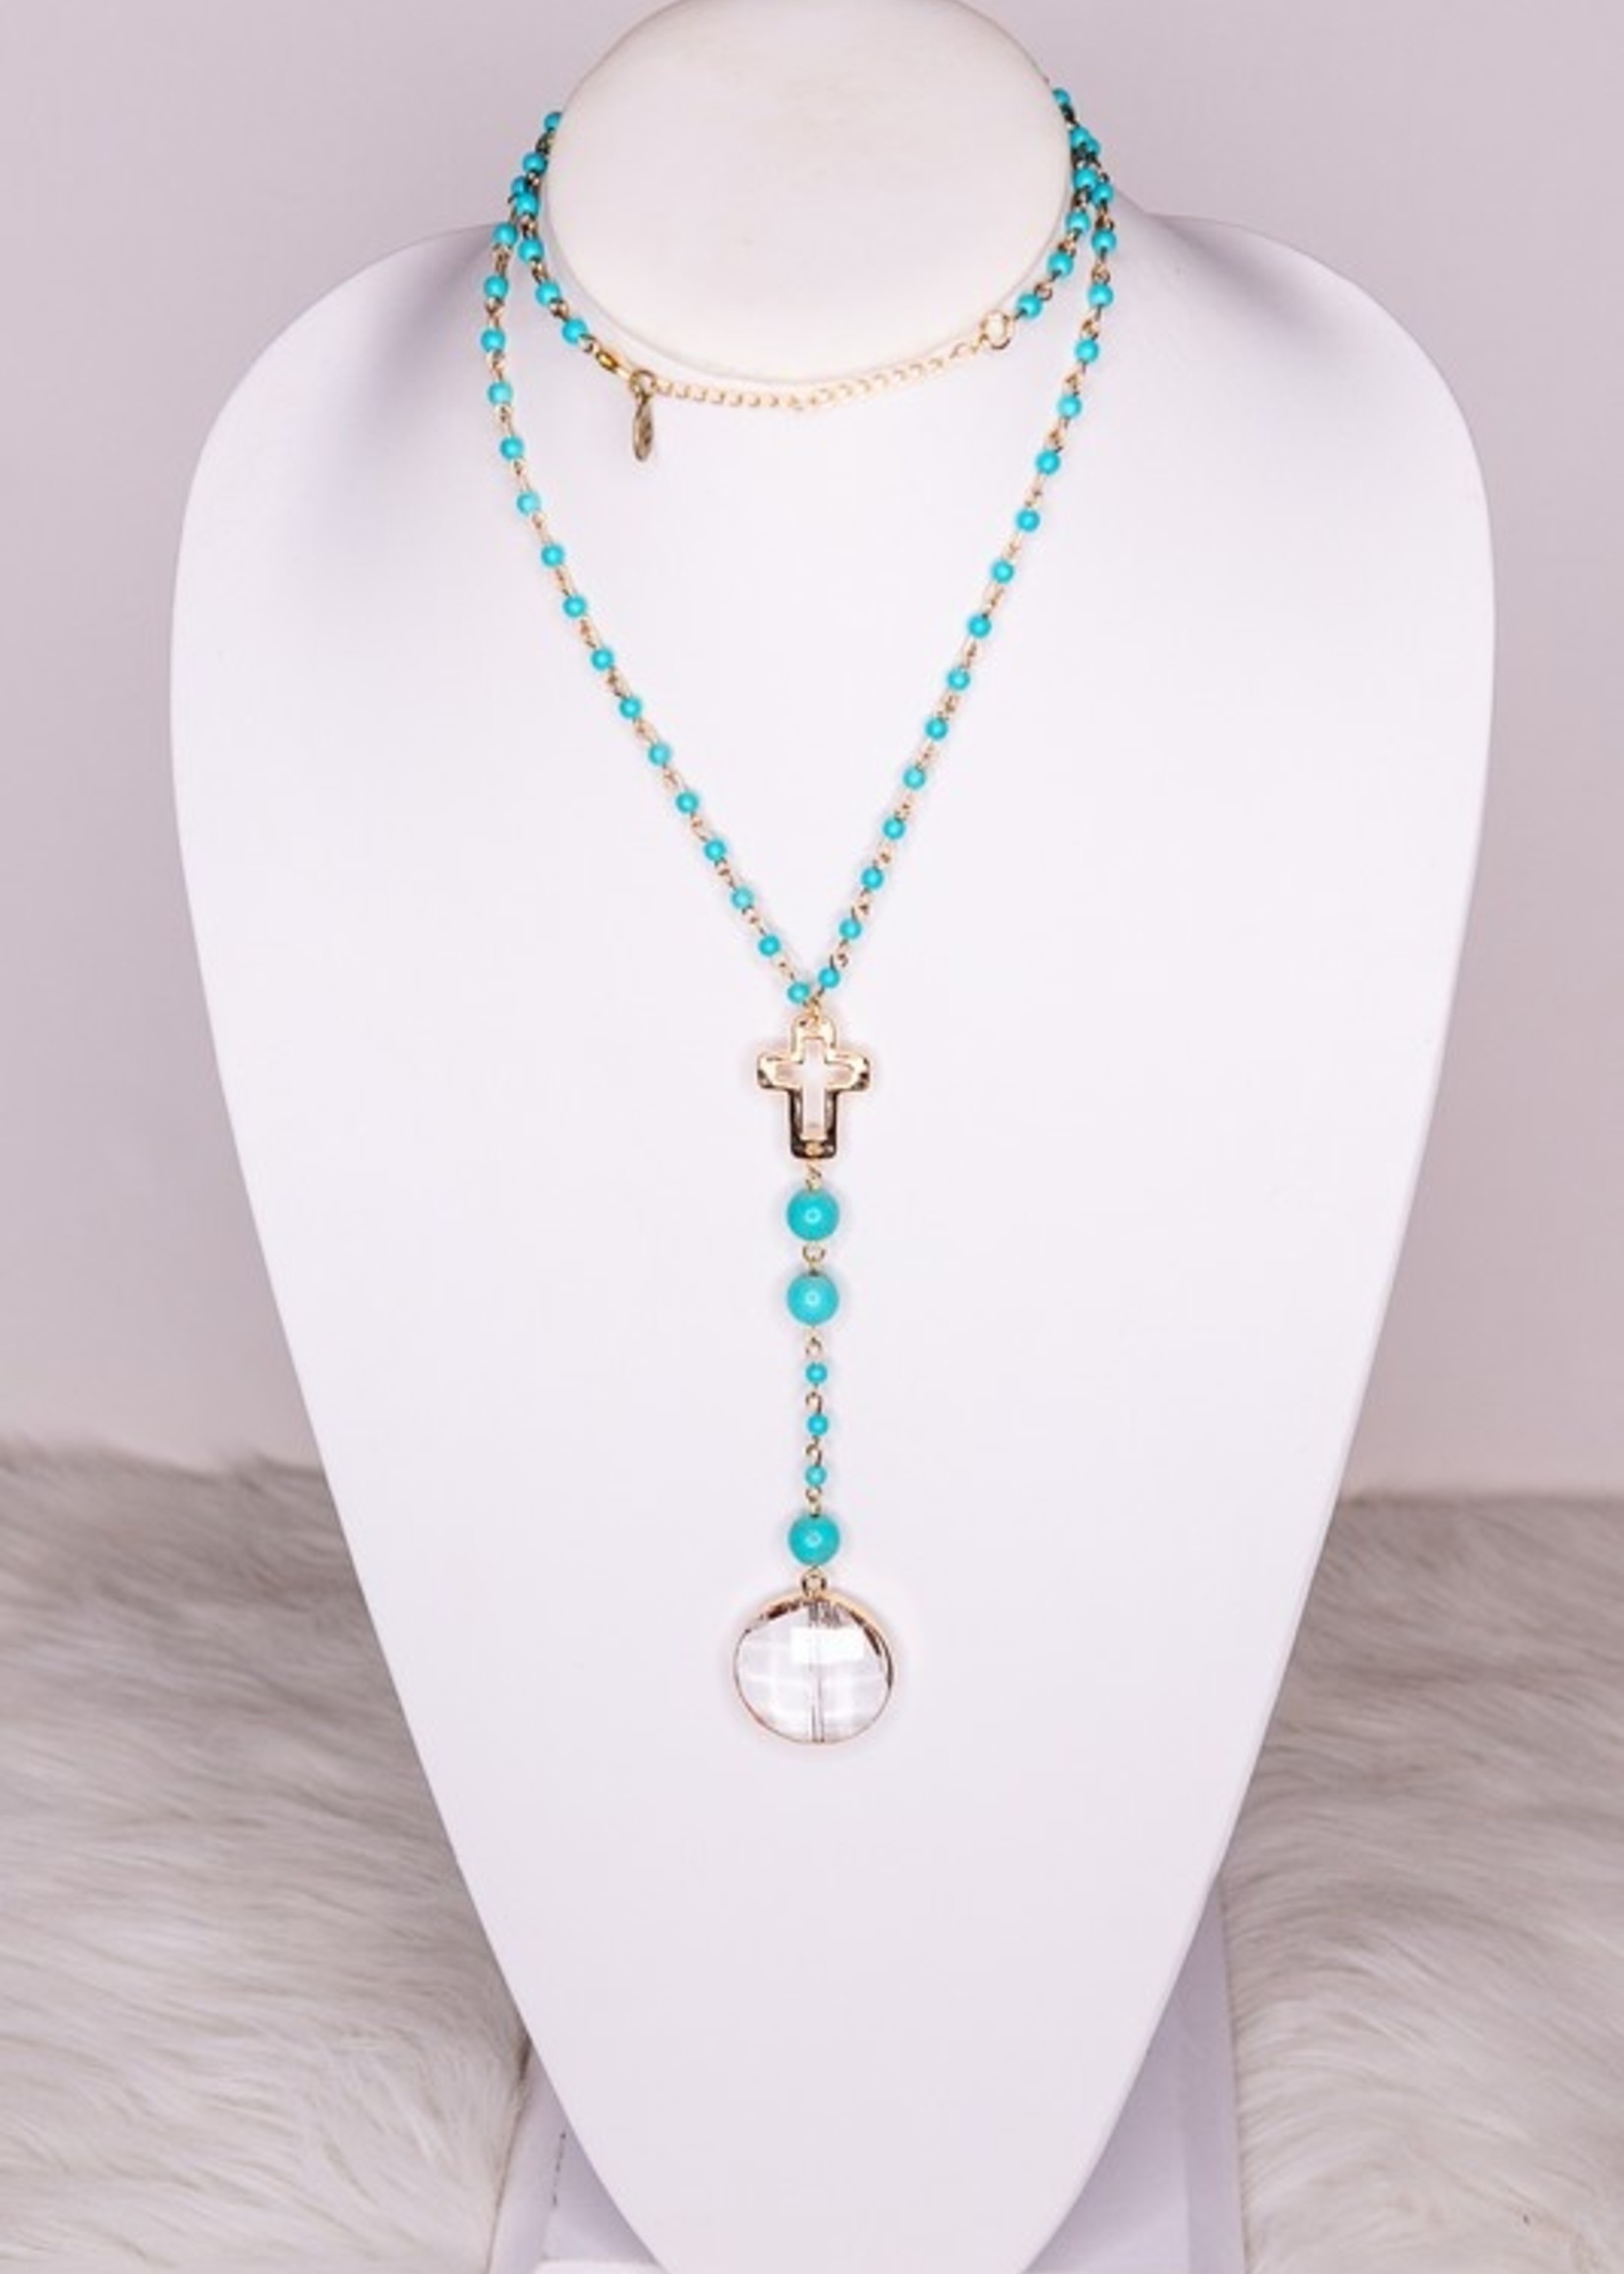 Turquoise beaded cross necklace